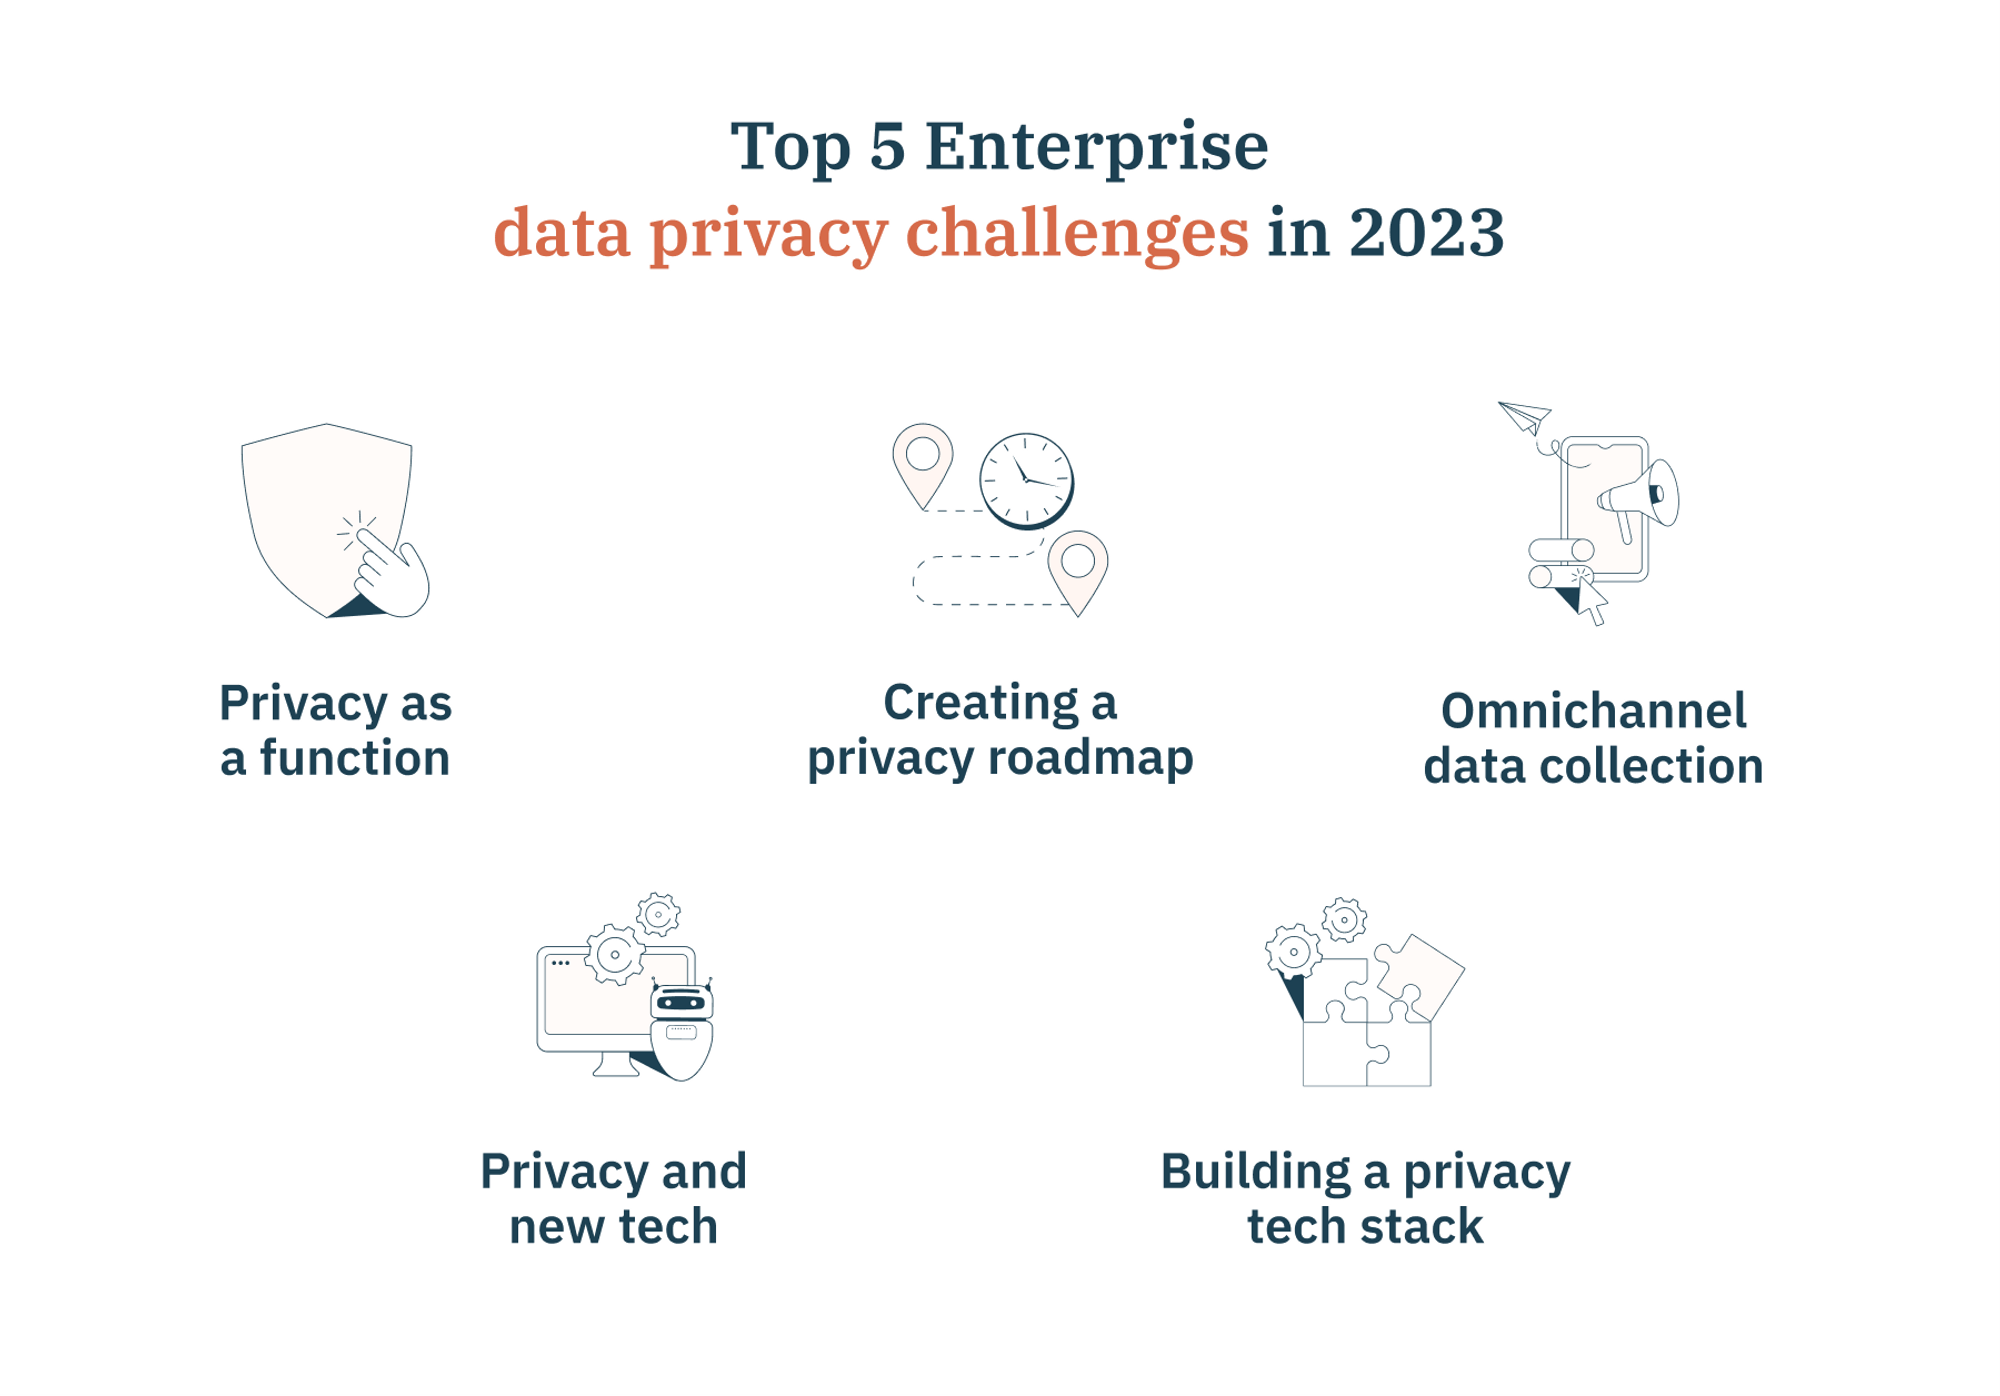 Didomi - Top 5 enterprise data privacy challenges in 2023